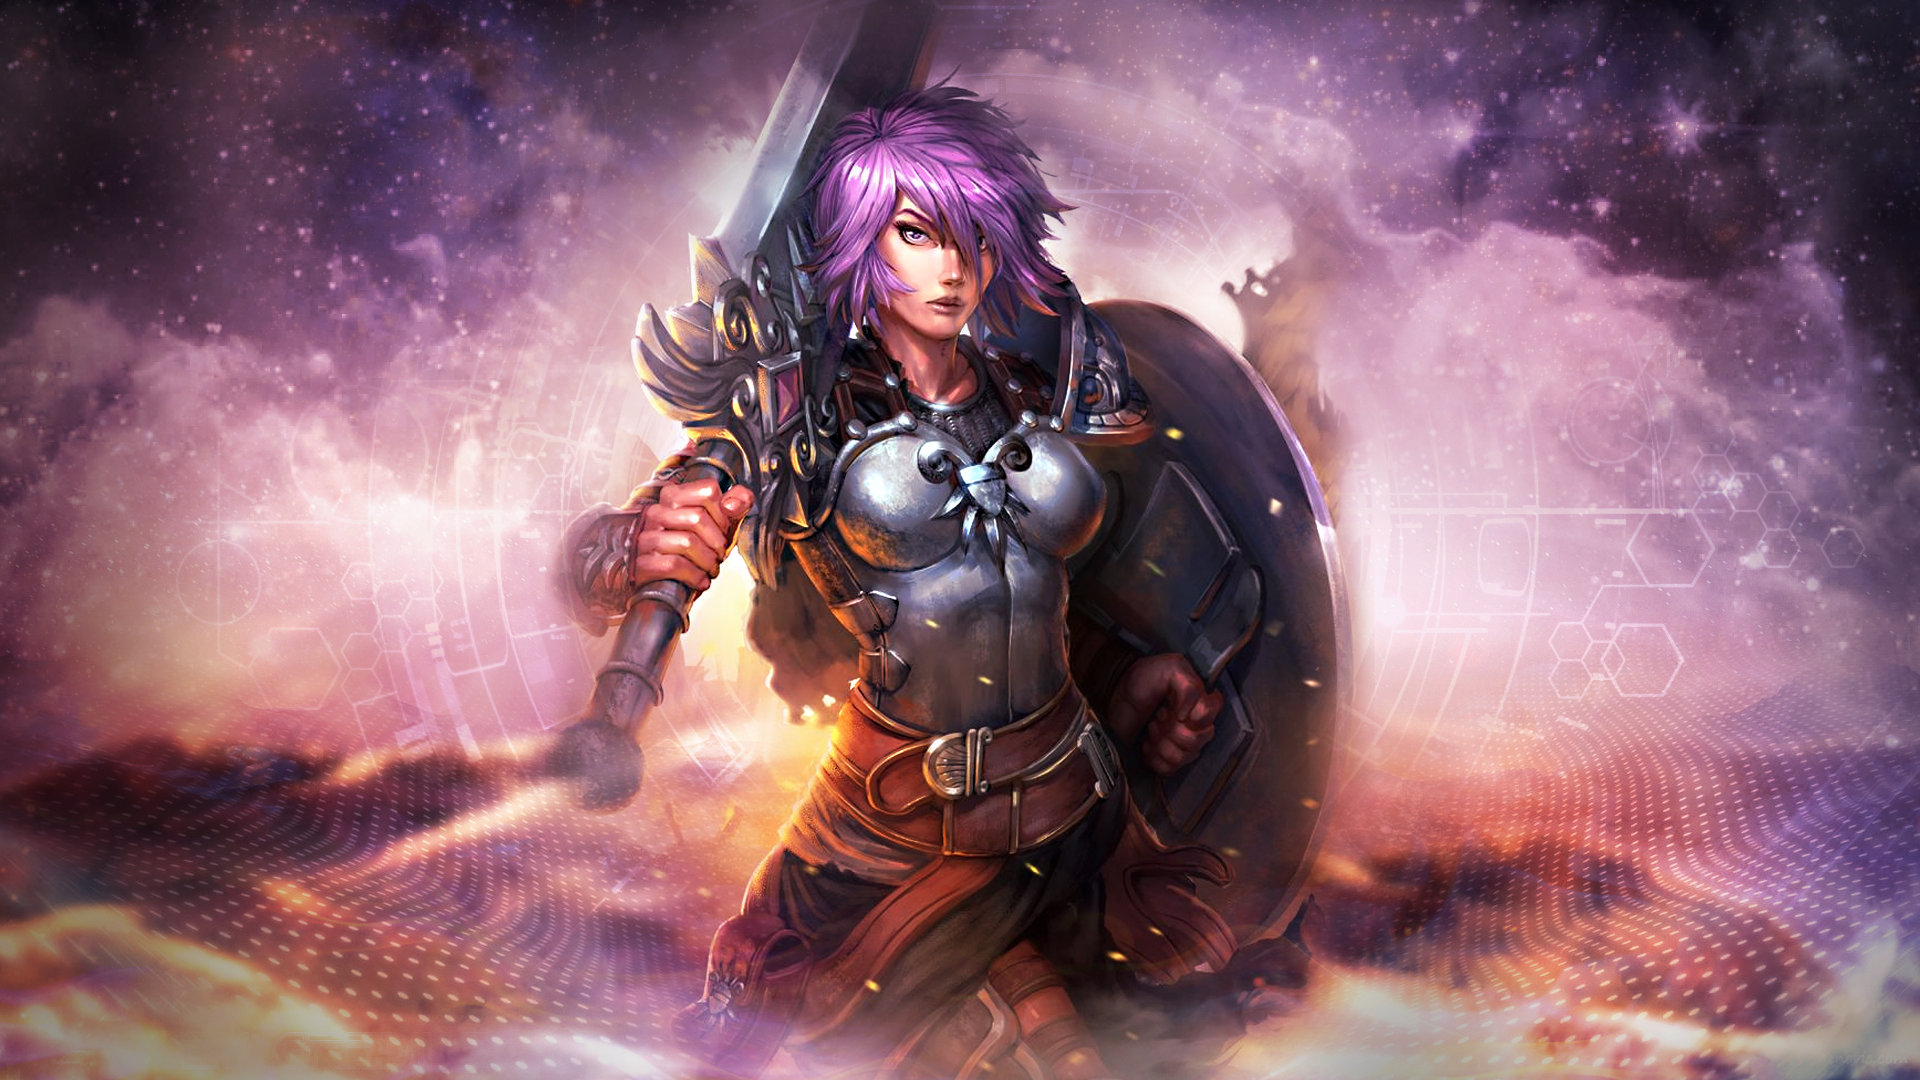 General 1920x1080 Smite 2014 (Year) video games sword fantasy art fantasy girl armor video game girls women with swords shield purple hair looking at viewer